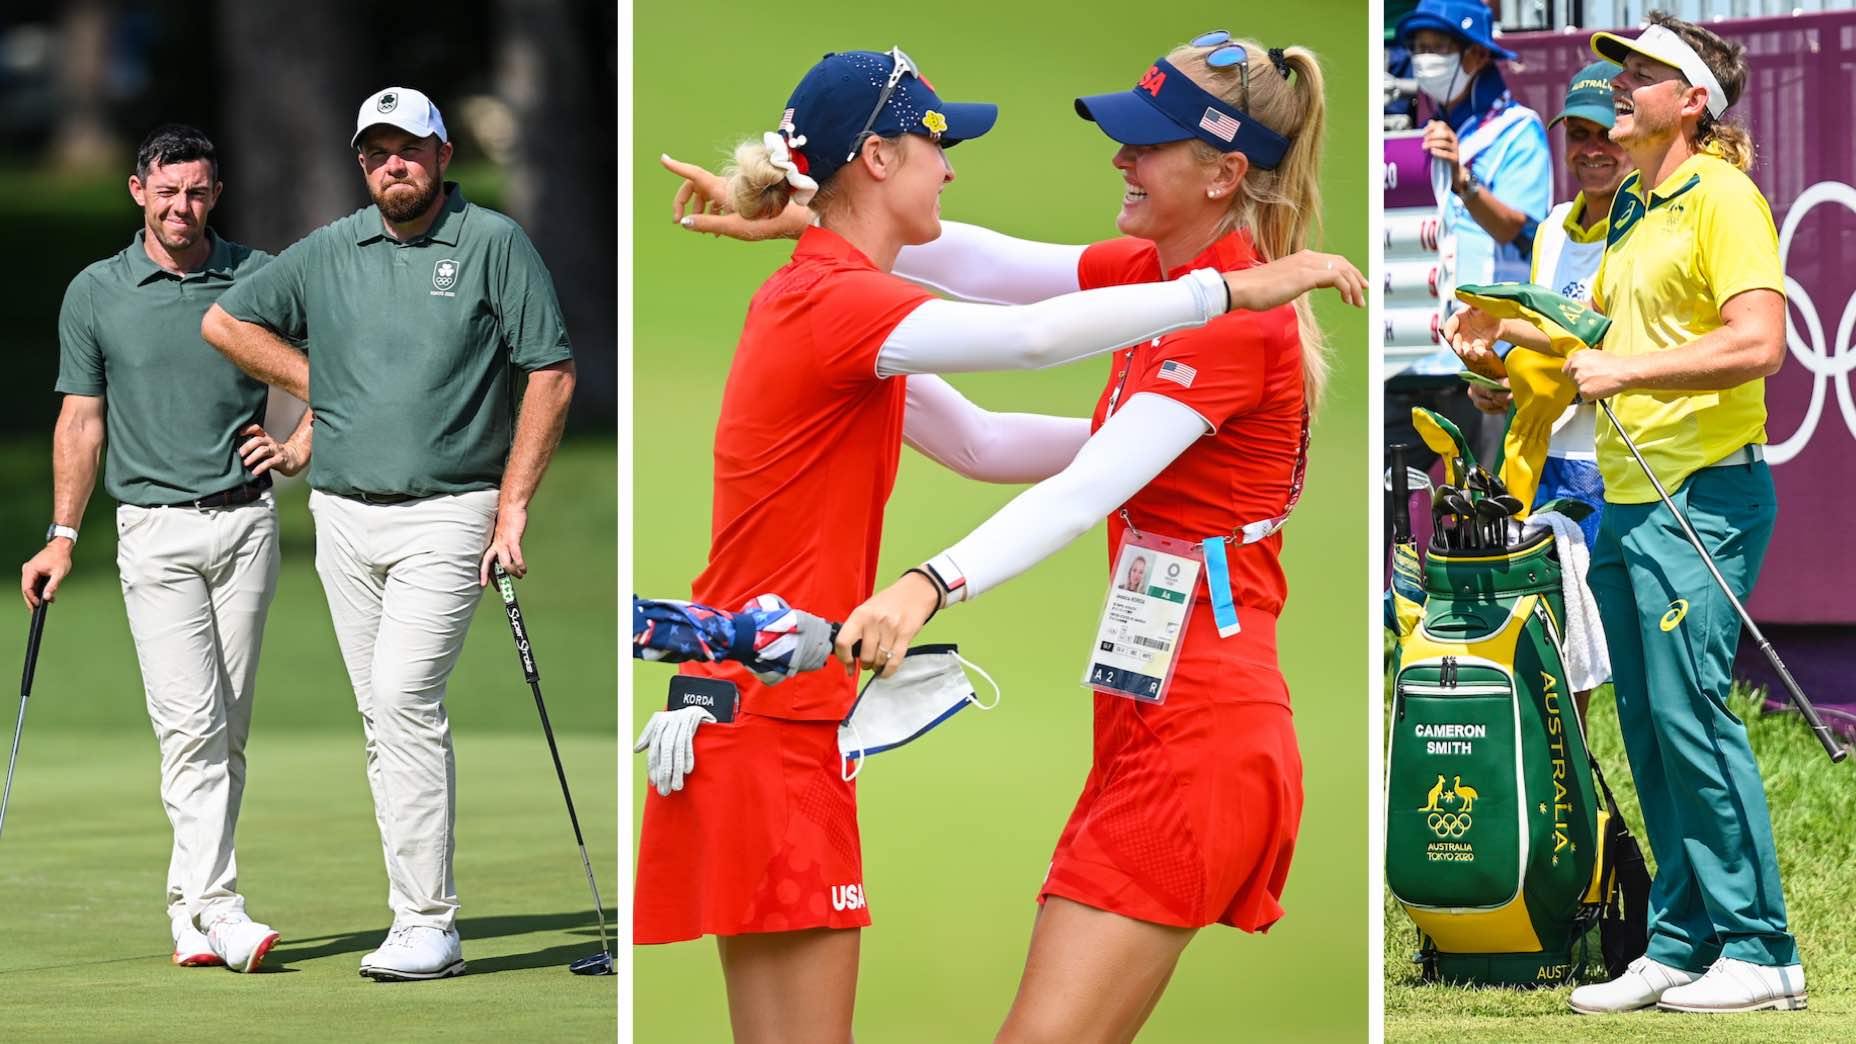 Here's the dramatic way Olympic Team Golf would have played out